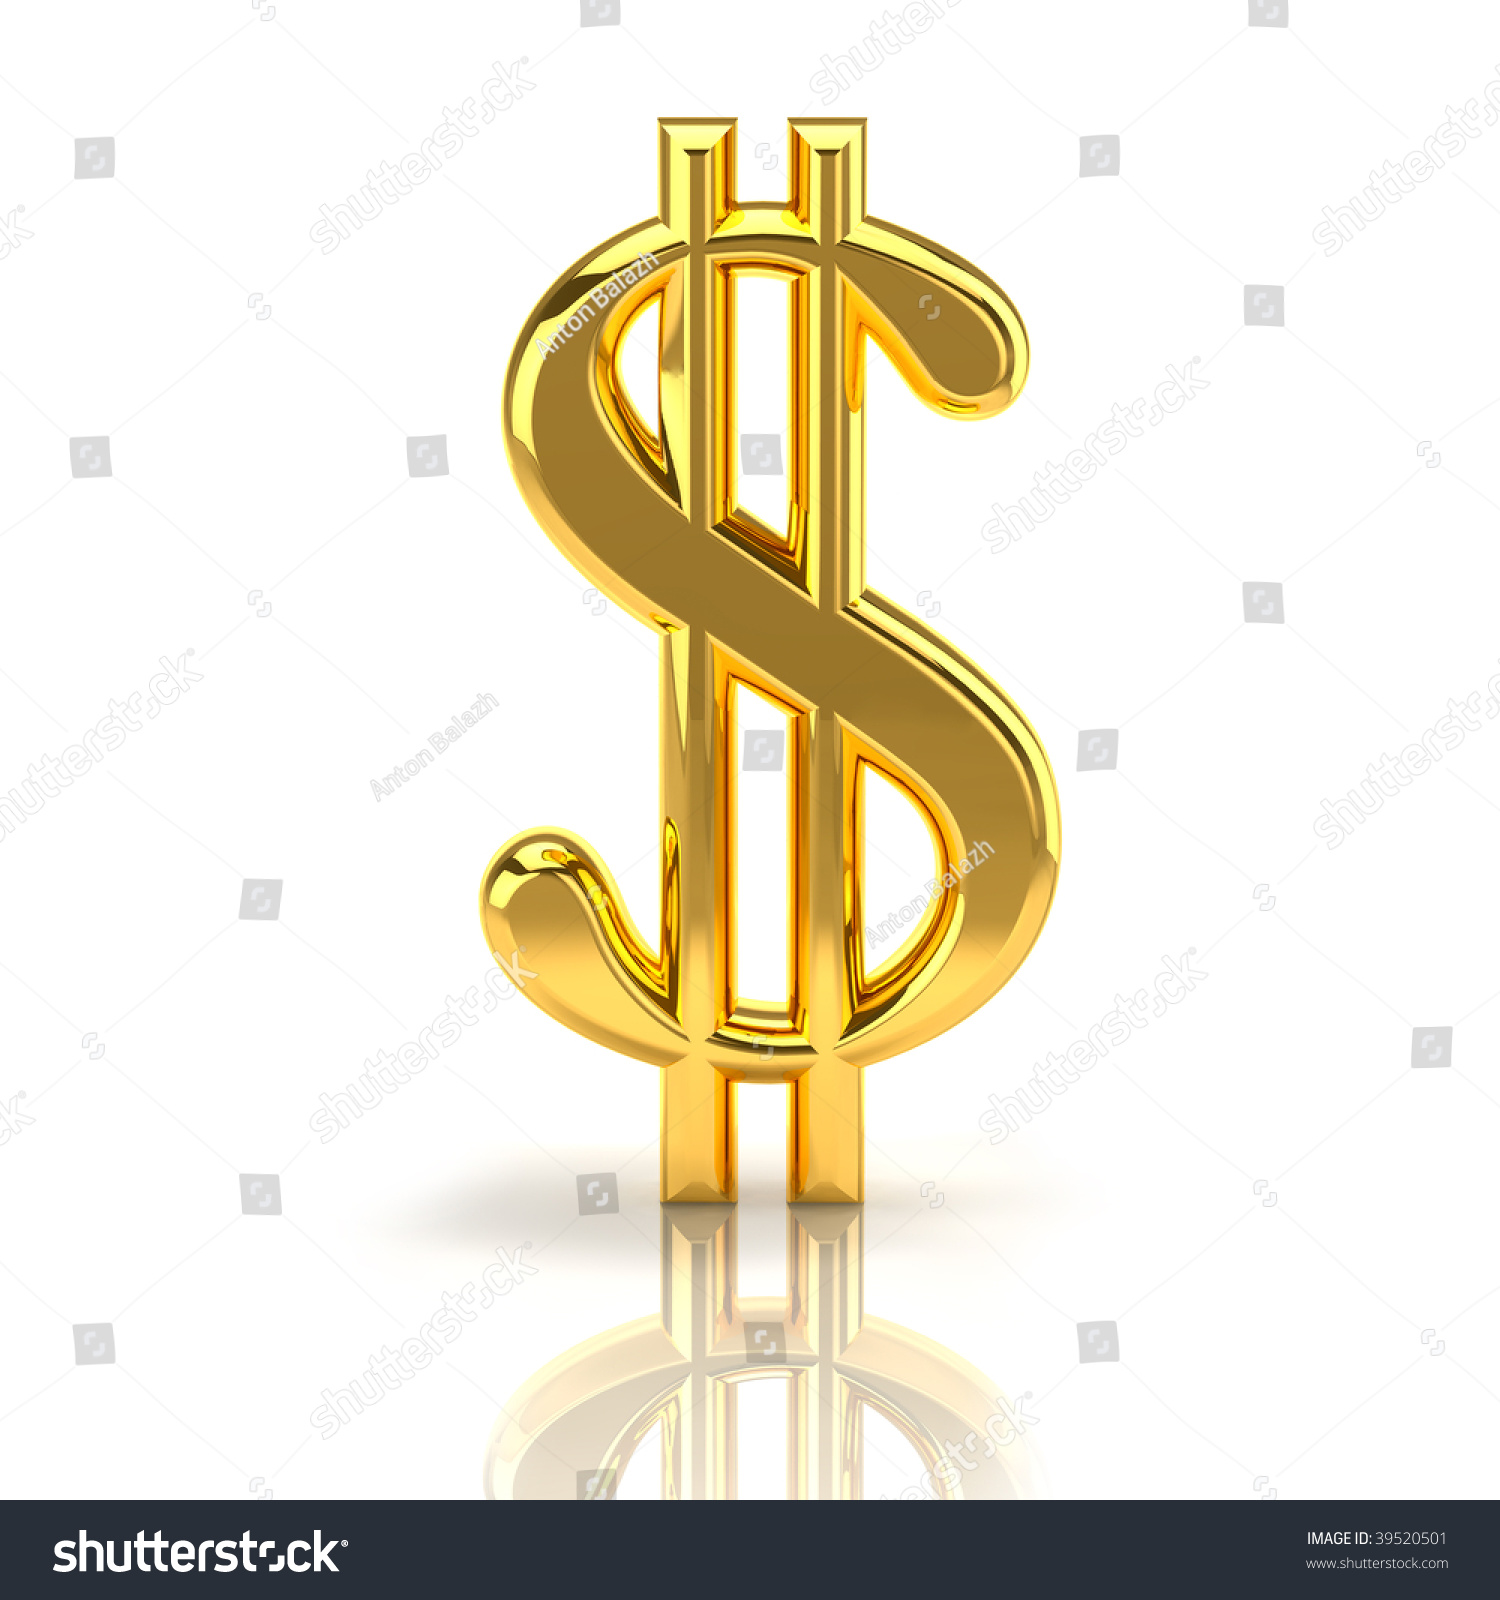 Golden Dollar Sign On White Stock Photo (100% Legal Protection ...